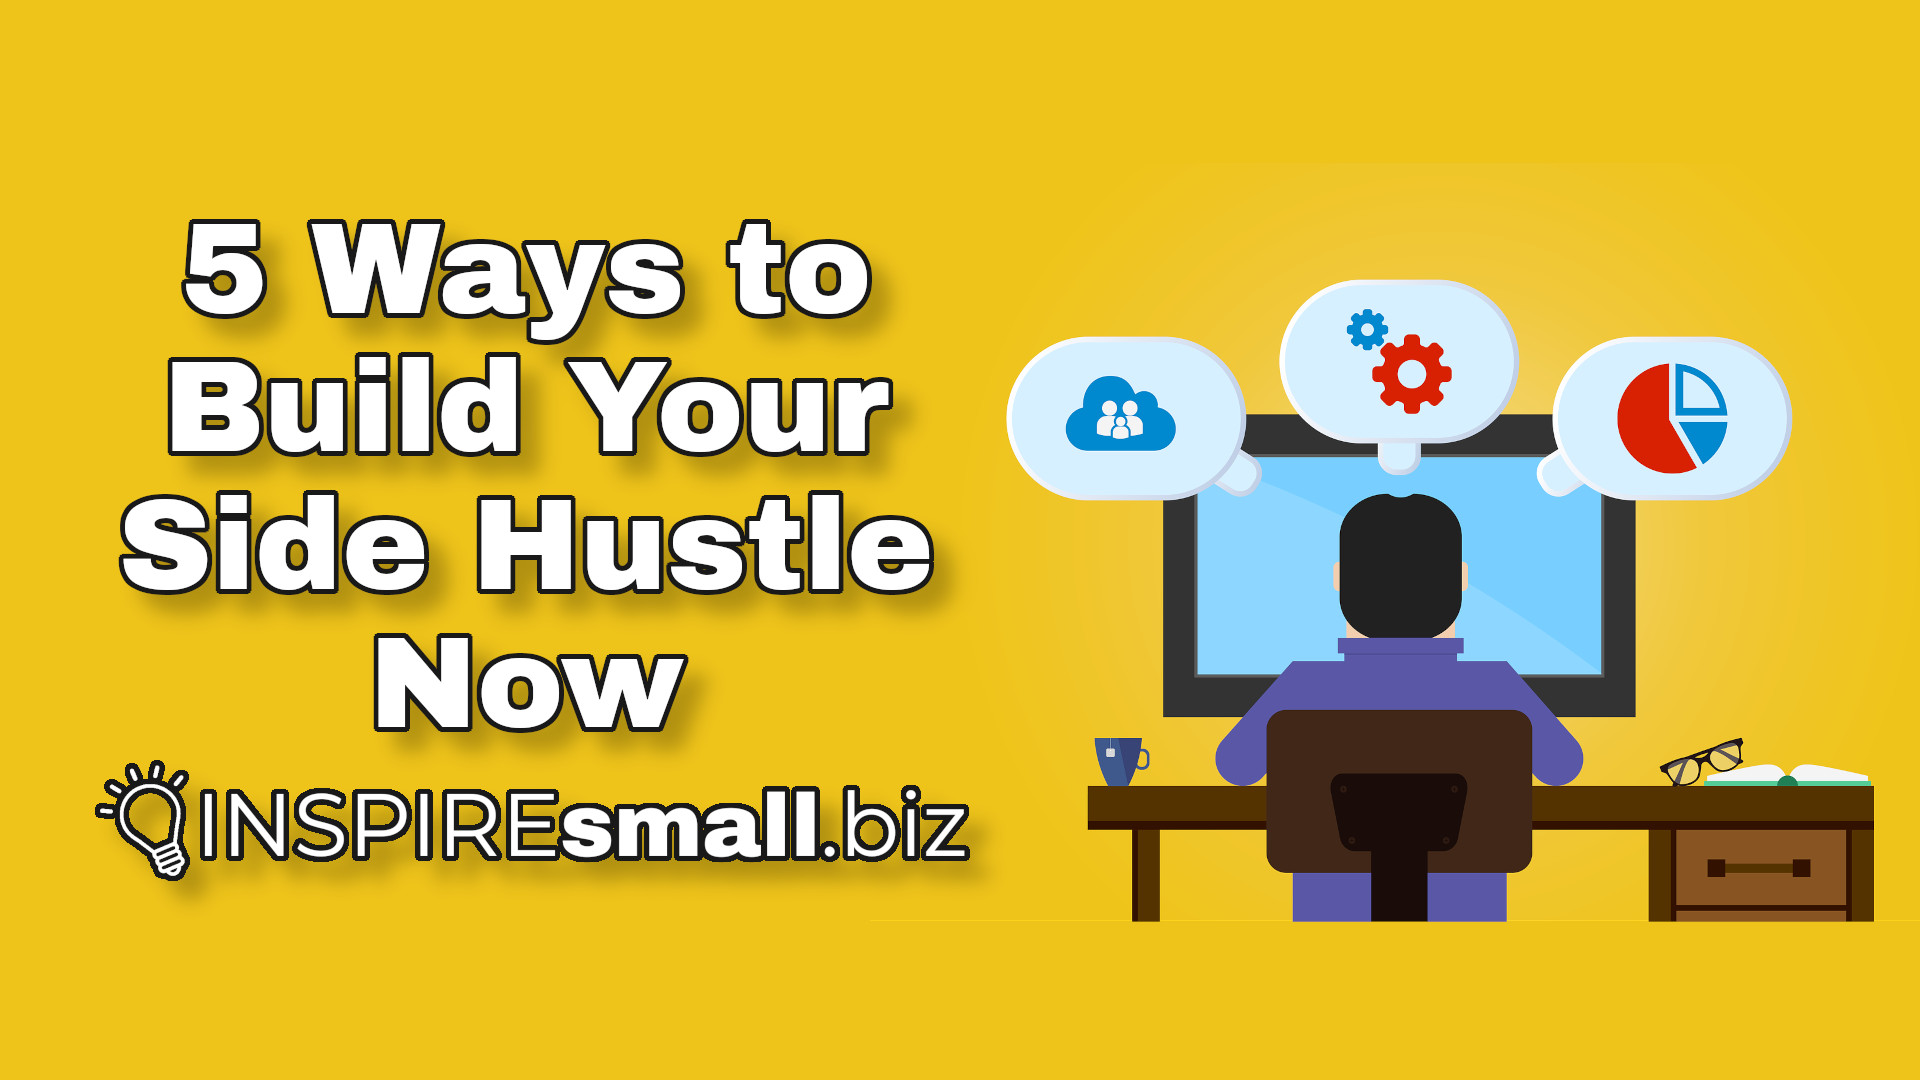 5 Ways to Promote Your Side Hustle Now